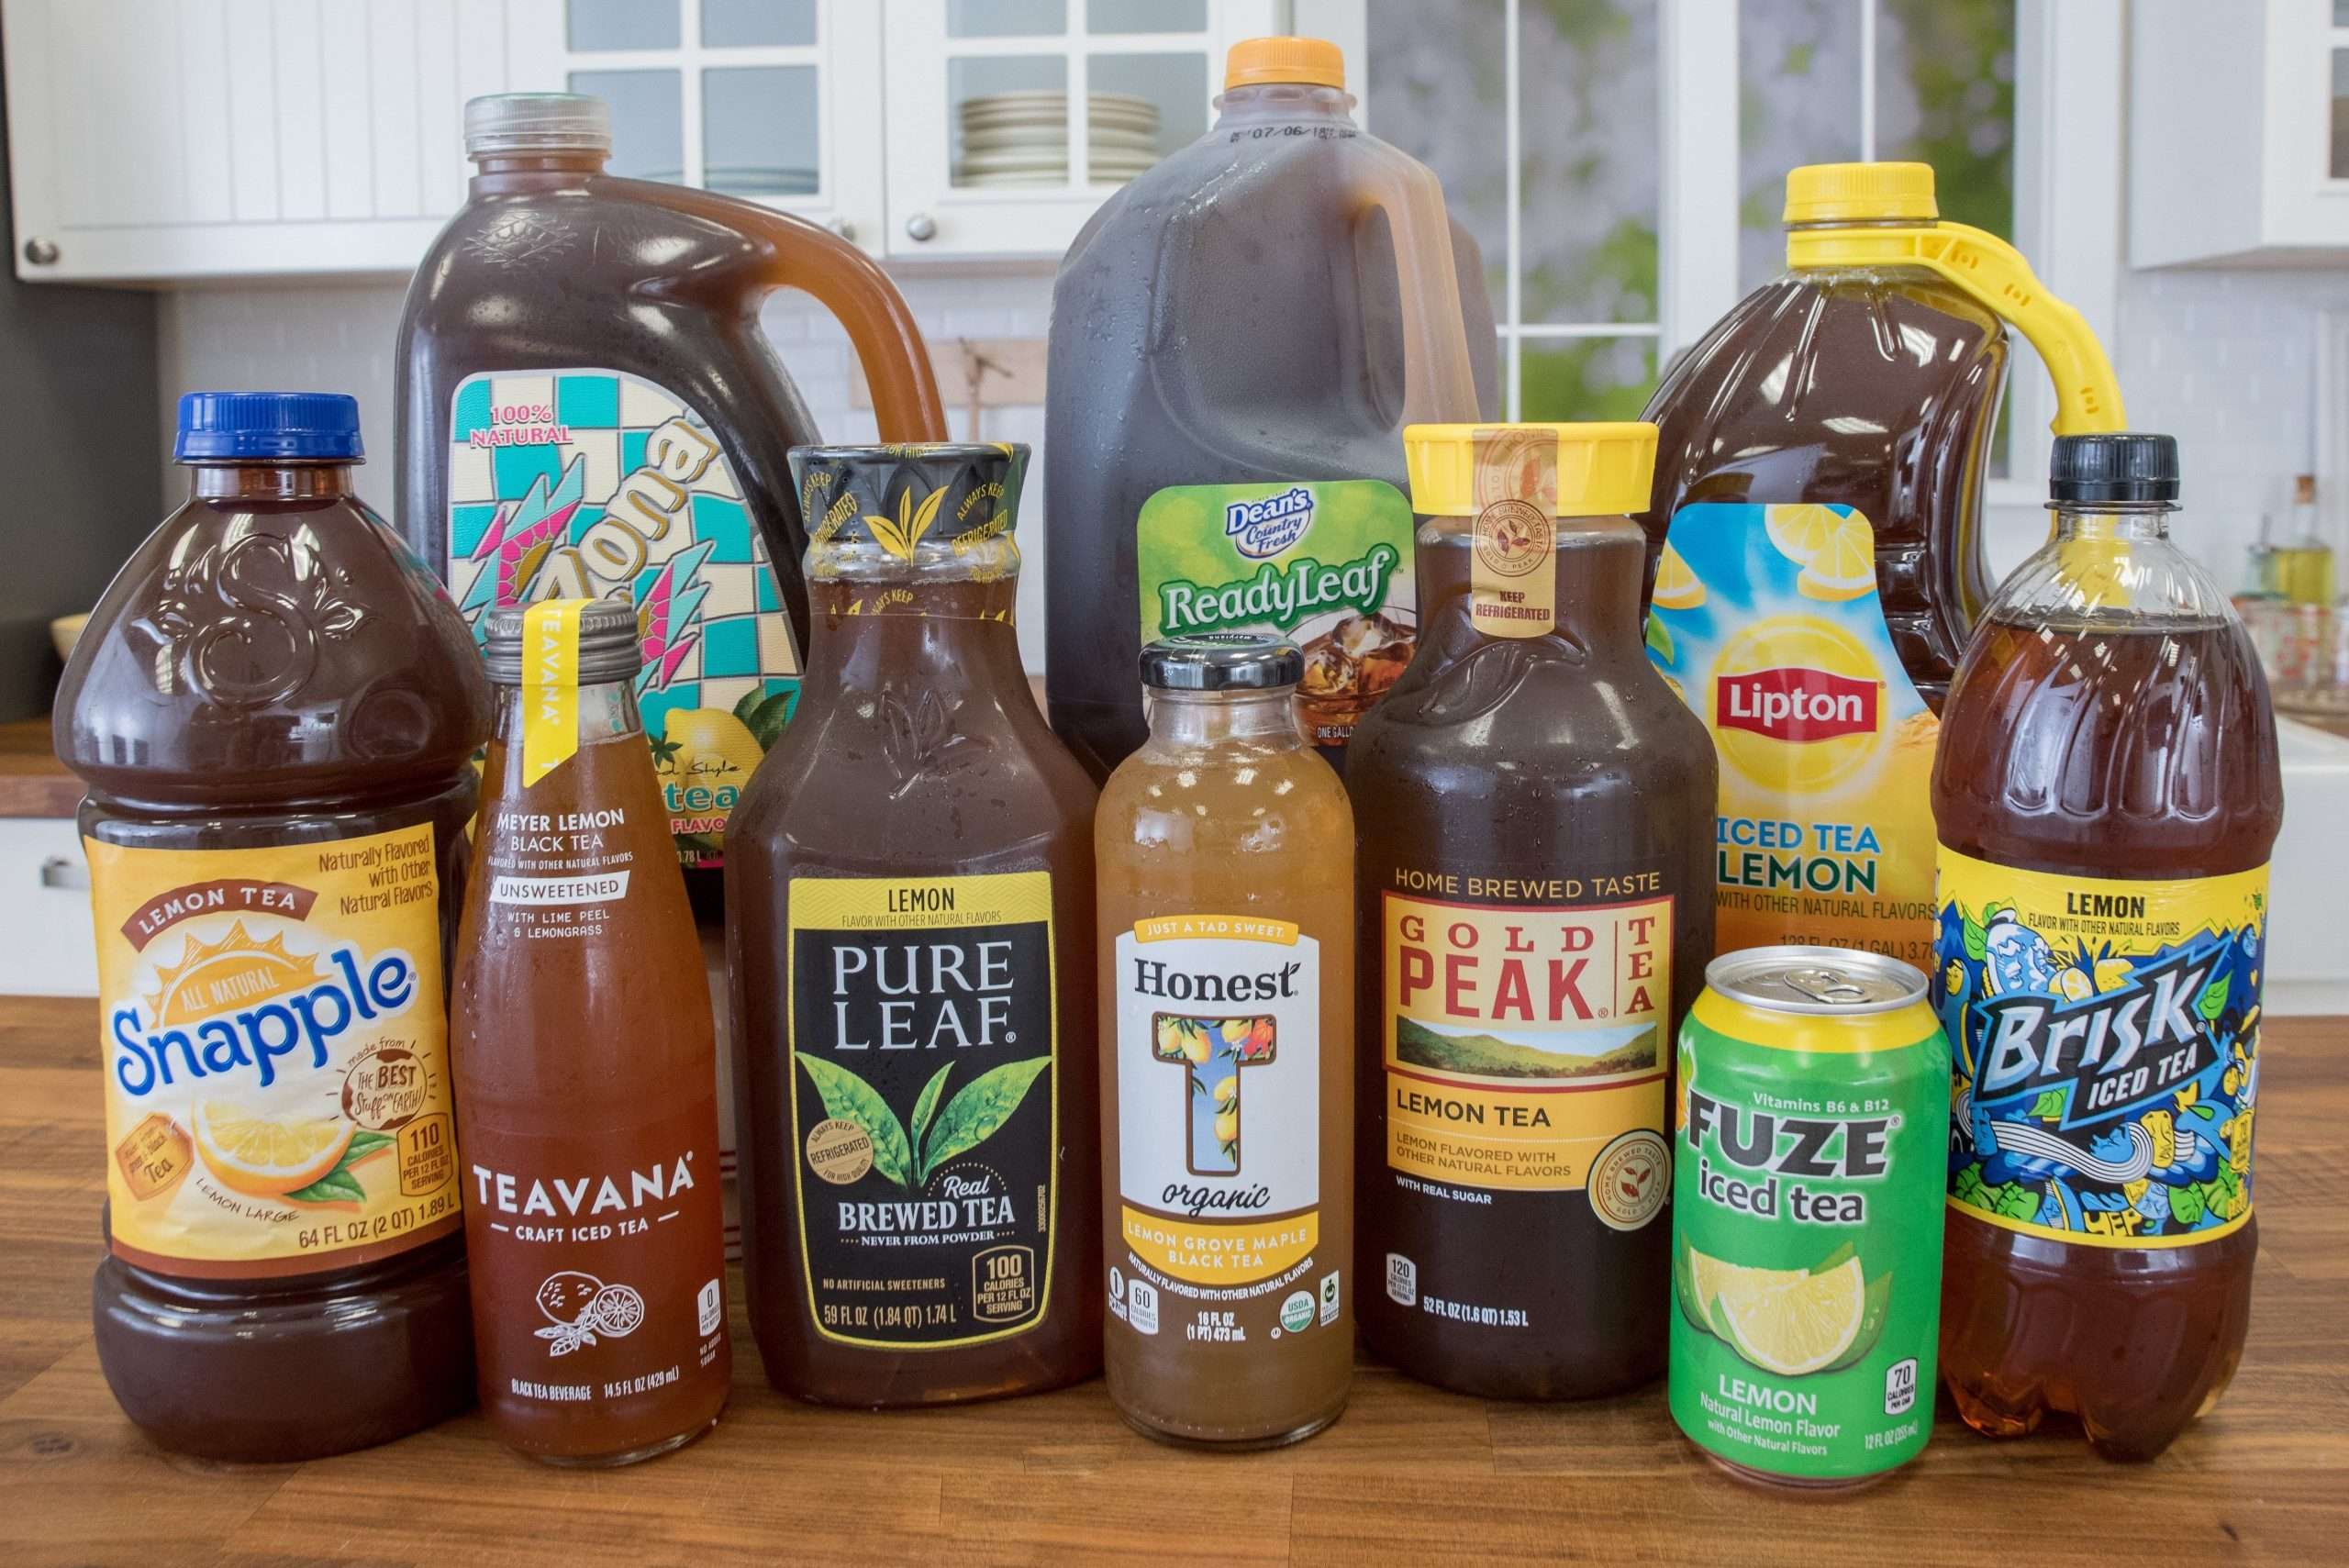 The Best Iced Tea Brand, According to a Taste Test ...